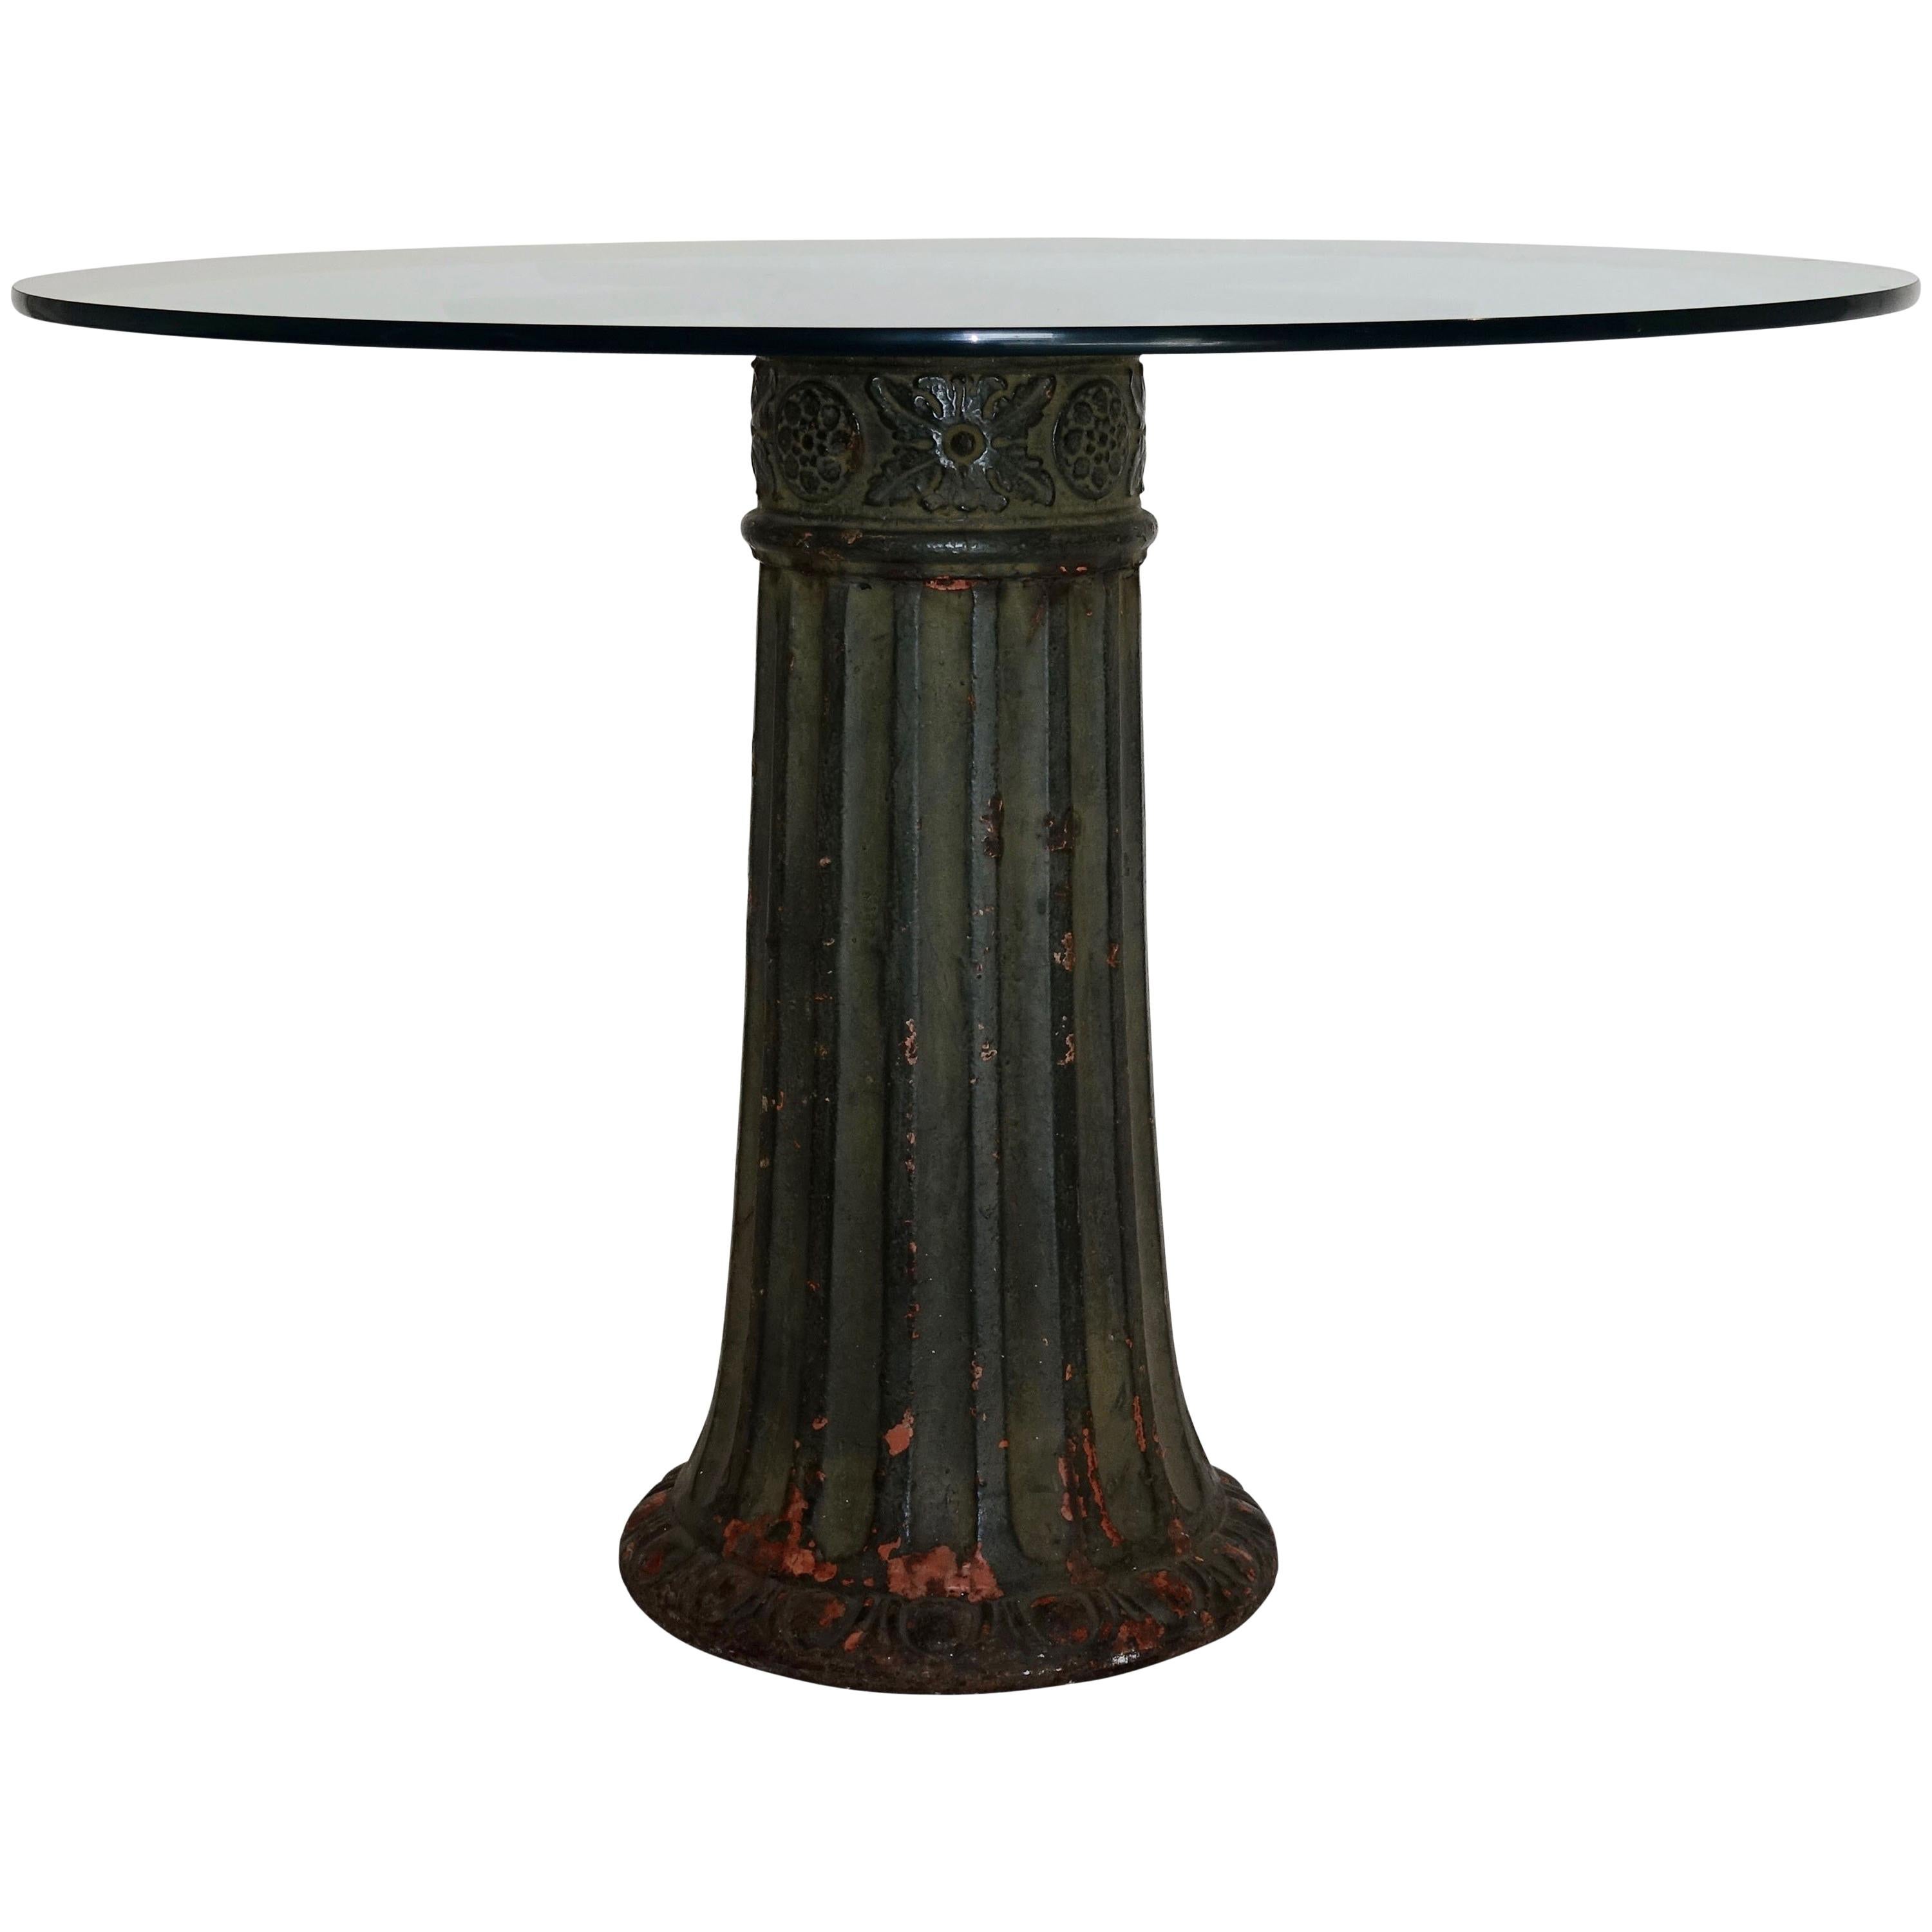 Antique Cast Iron Dining Center Table with Glass Top, American, circa 1910